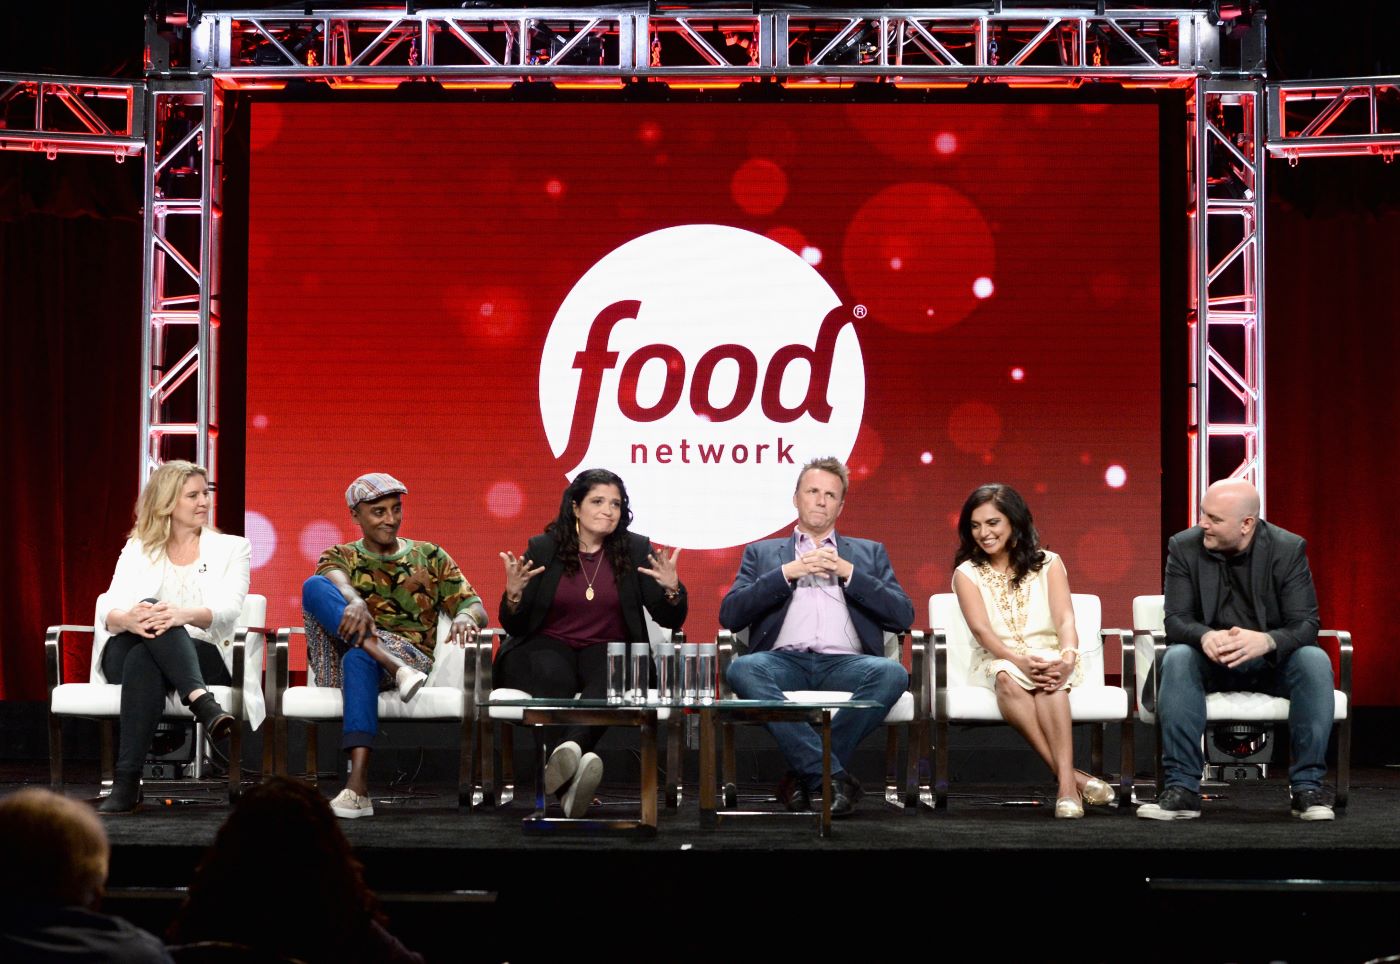 6 'Chopped' judges sitting on a stage dressed professionally in front of an industrially framed red screen with food network printed in white on it.